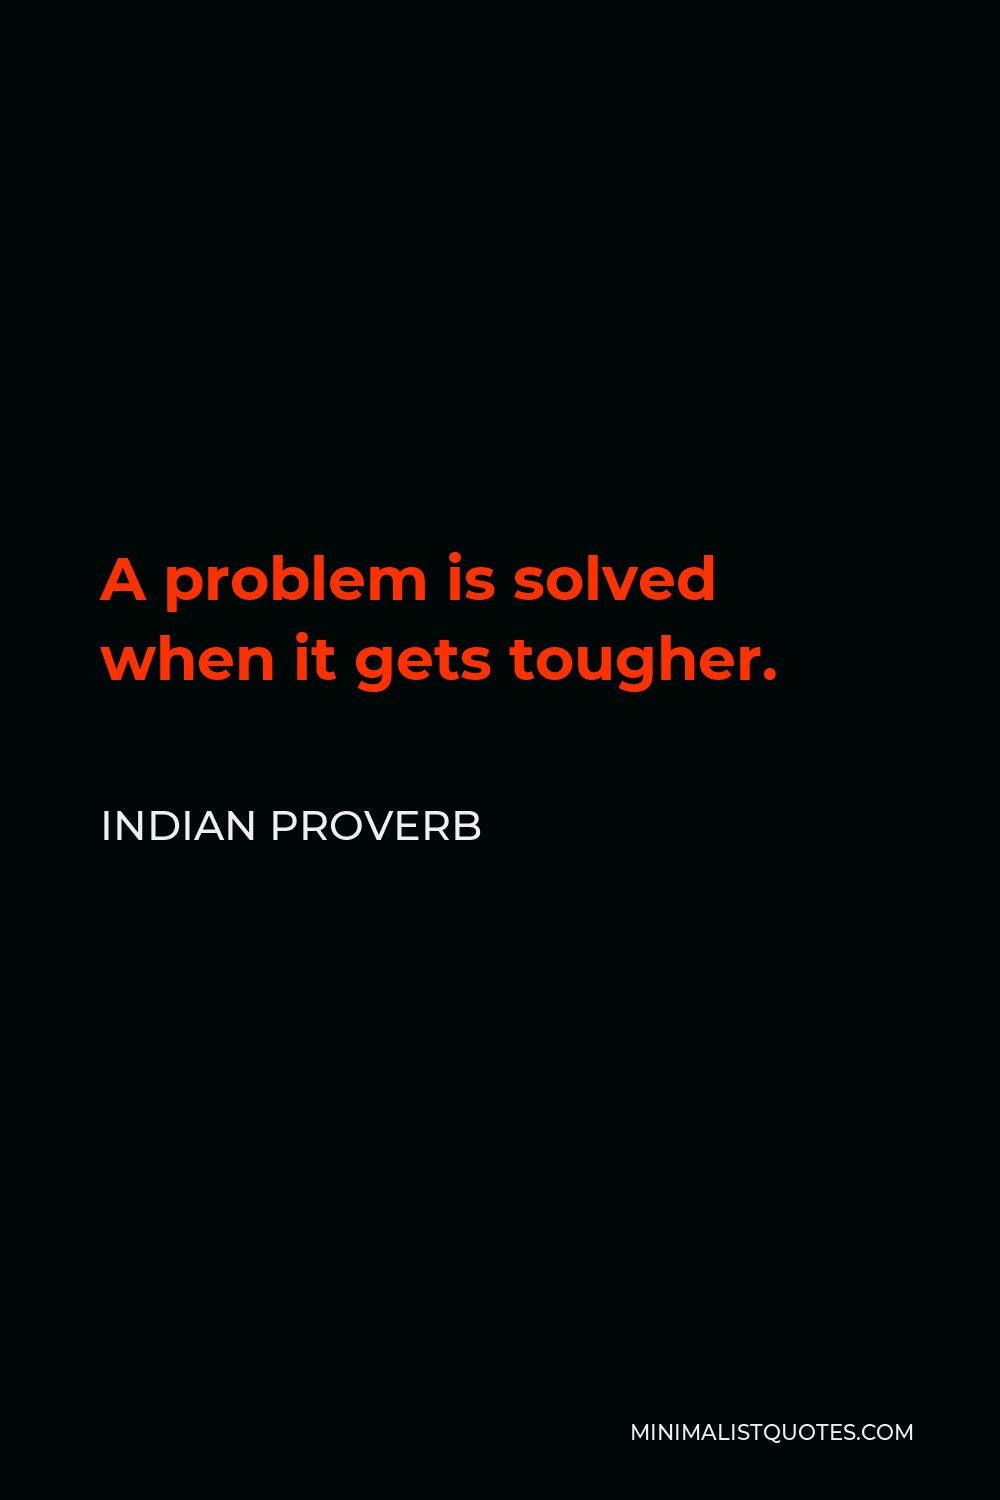 Indian Proverb Quote - A problem is solved when it gets tougher.